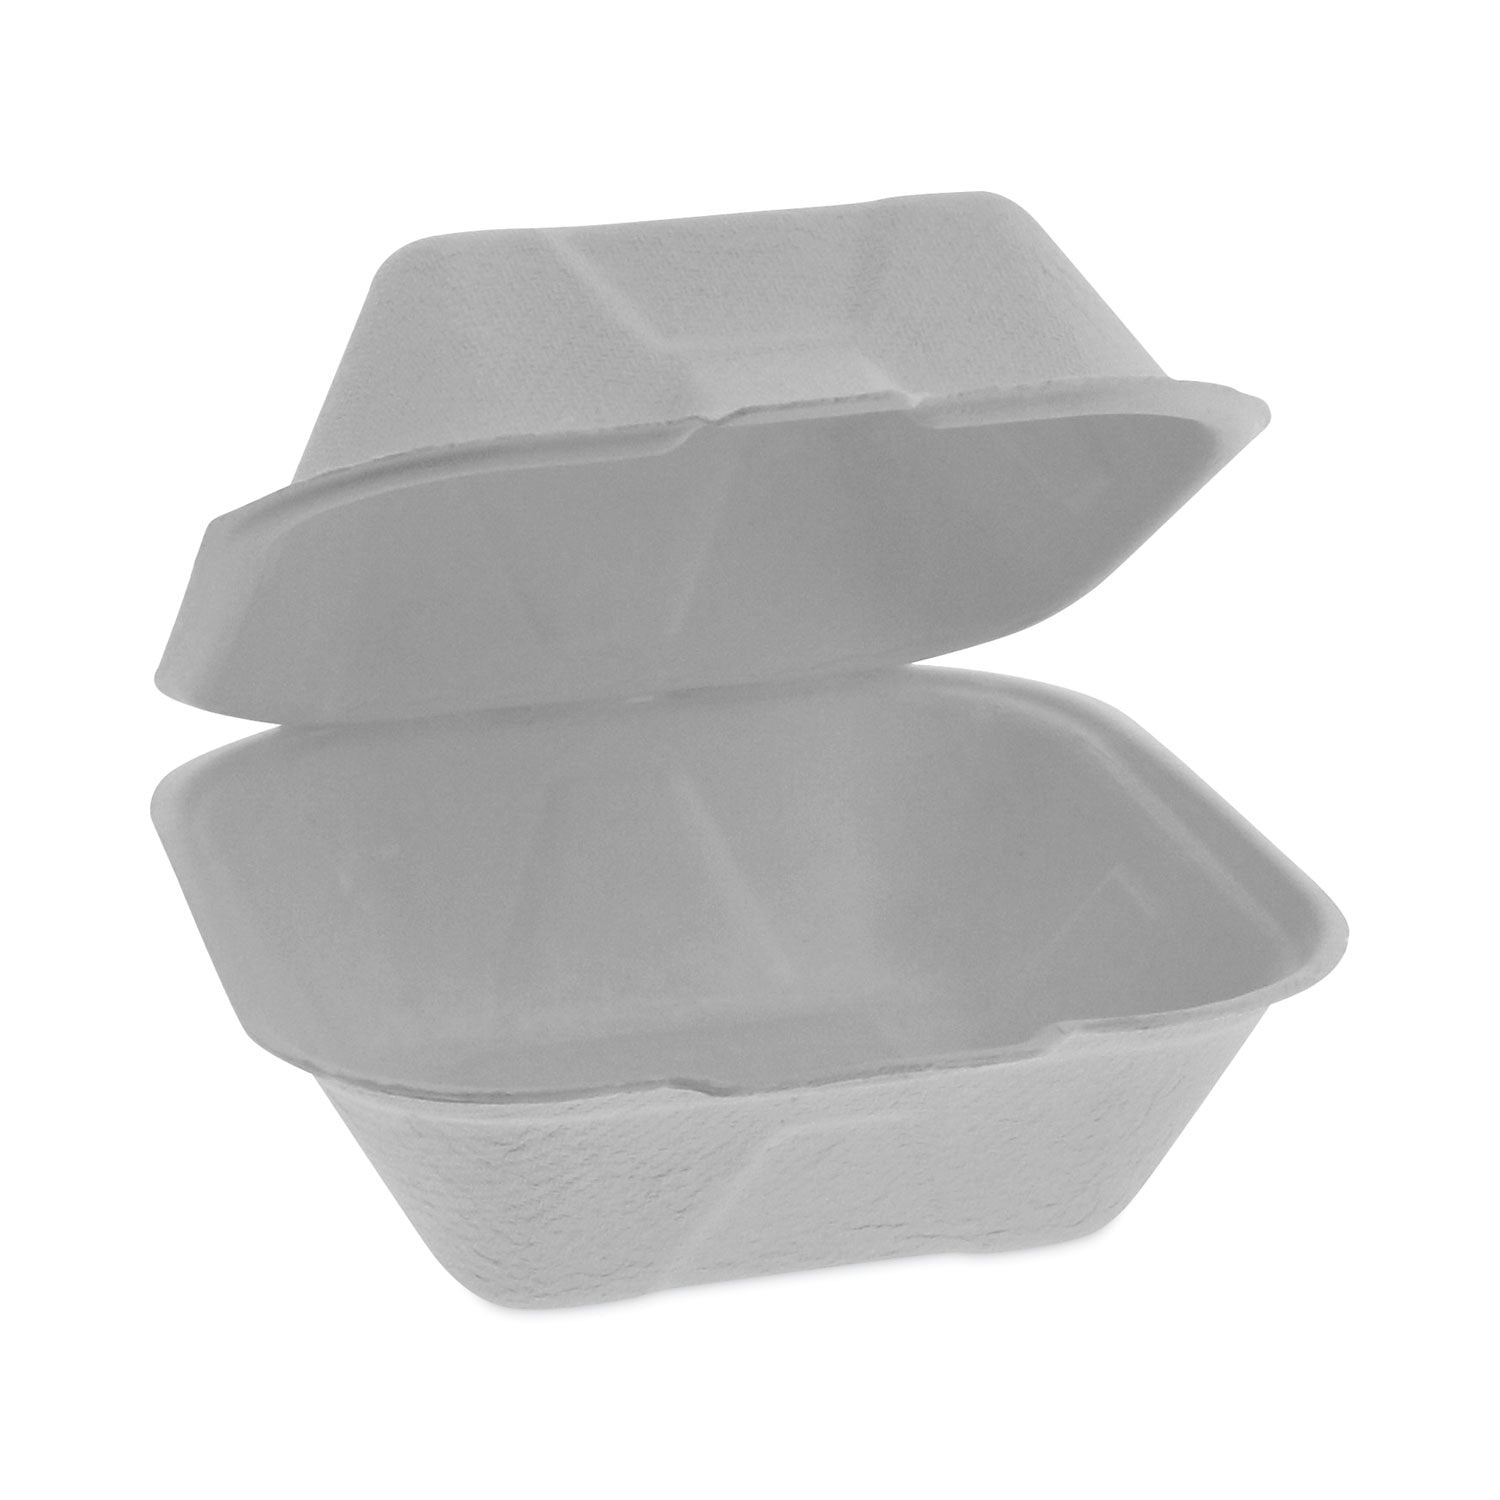 earthchoice-bagasse-hinged-lid-container-single-tab-lock-6-sandwich-58-x-58-x-33-natural-sugarcane-500-carton_pctymch00800001 - 1